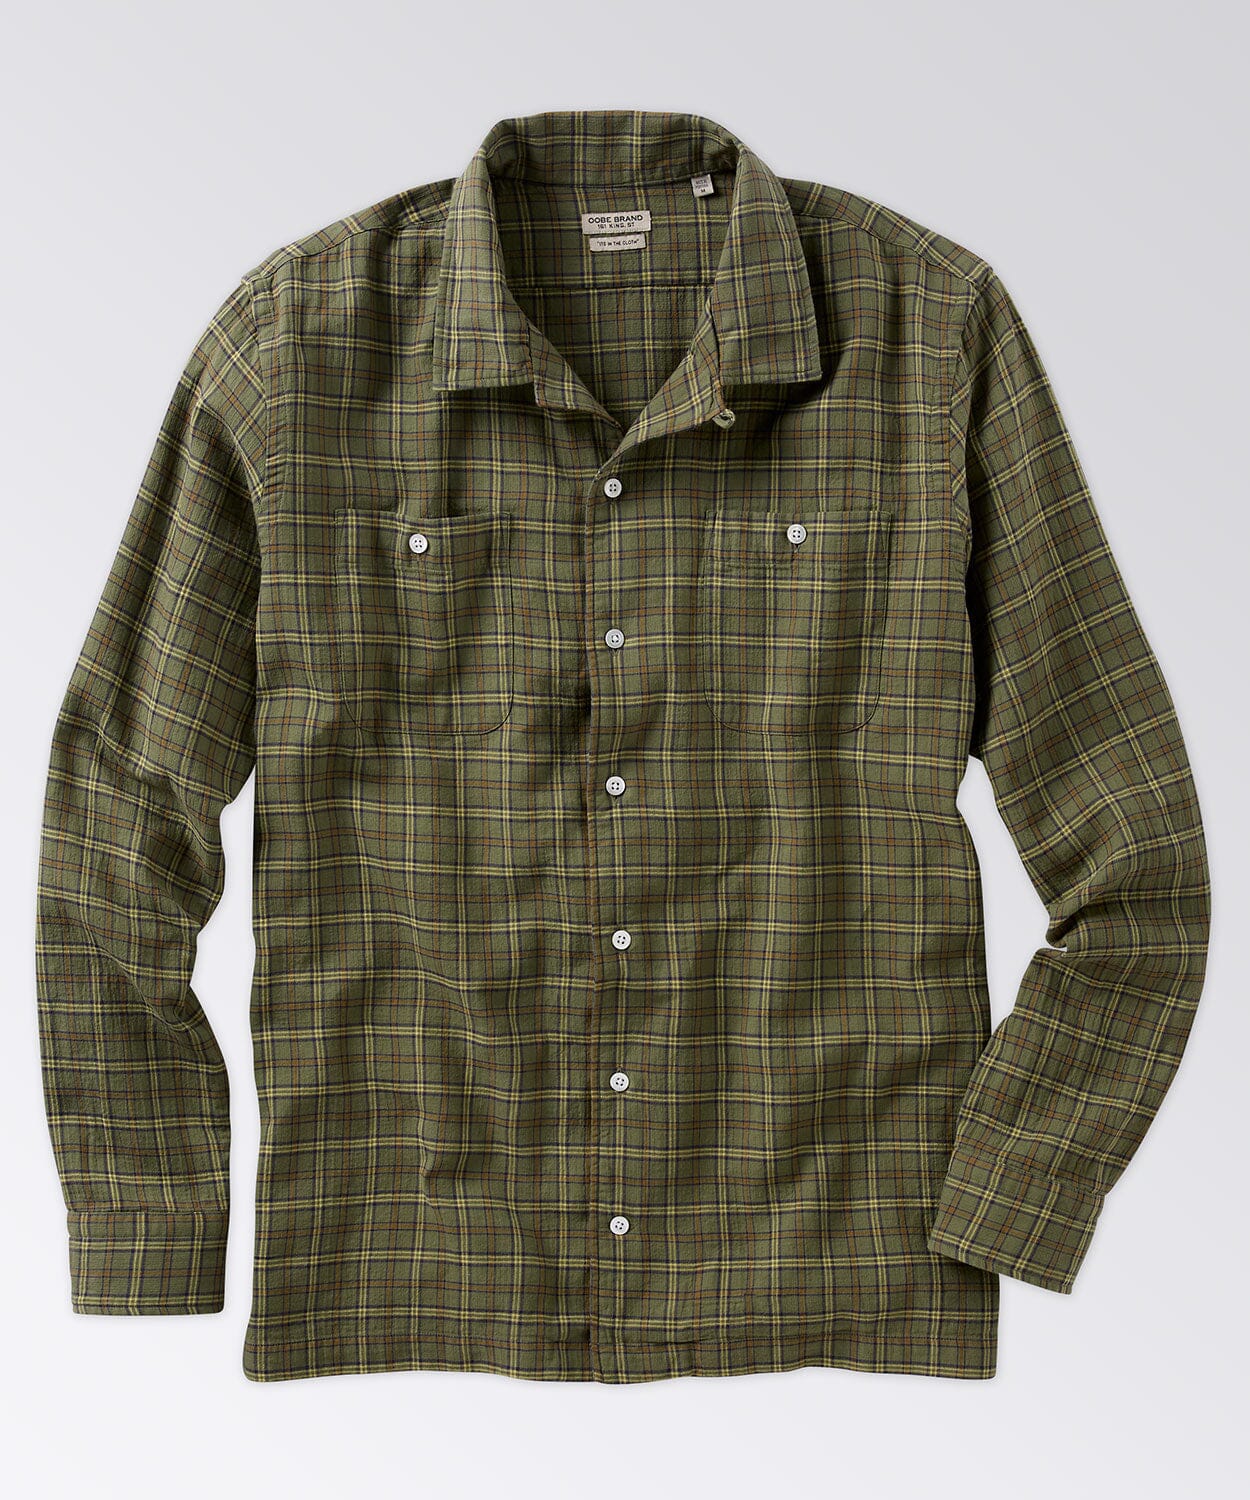 Stanton Camp Shirt Button Downs OOBE BRAND Olive Plaid S 